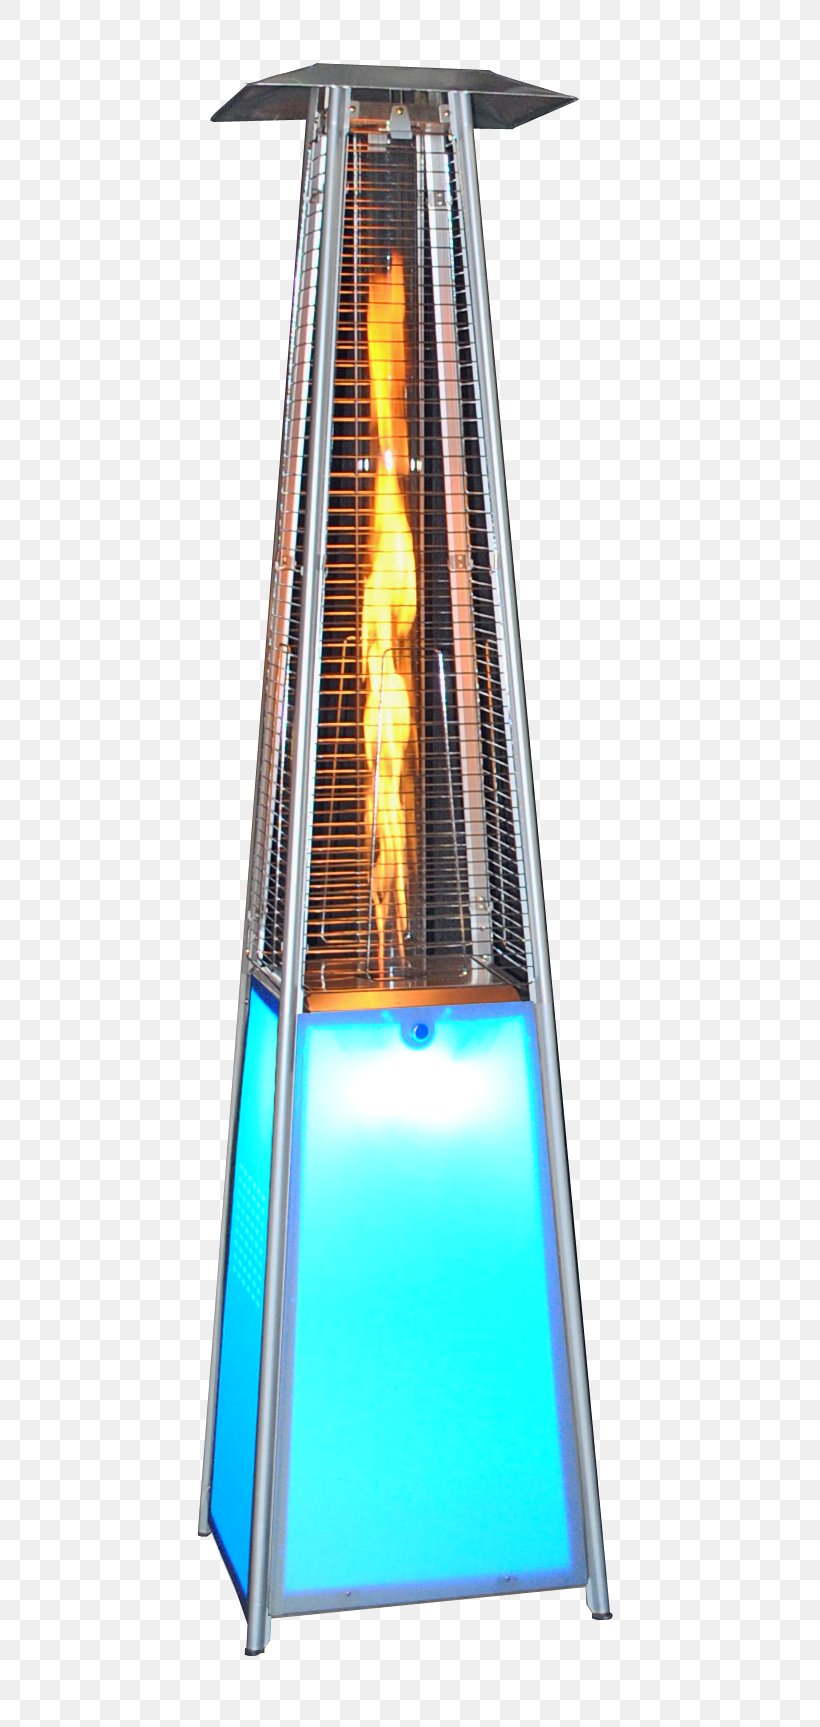 Patio Heaters Propane Gas Heater Light Outdoor Heating, PNG, 646x1727px, Patio Heaters, Gas Heater, Heat, Heater, Infrared Heater Download Free